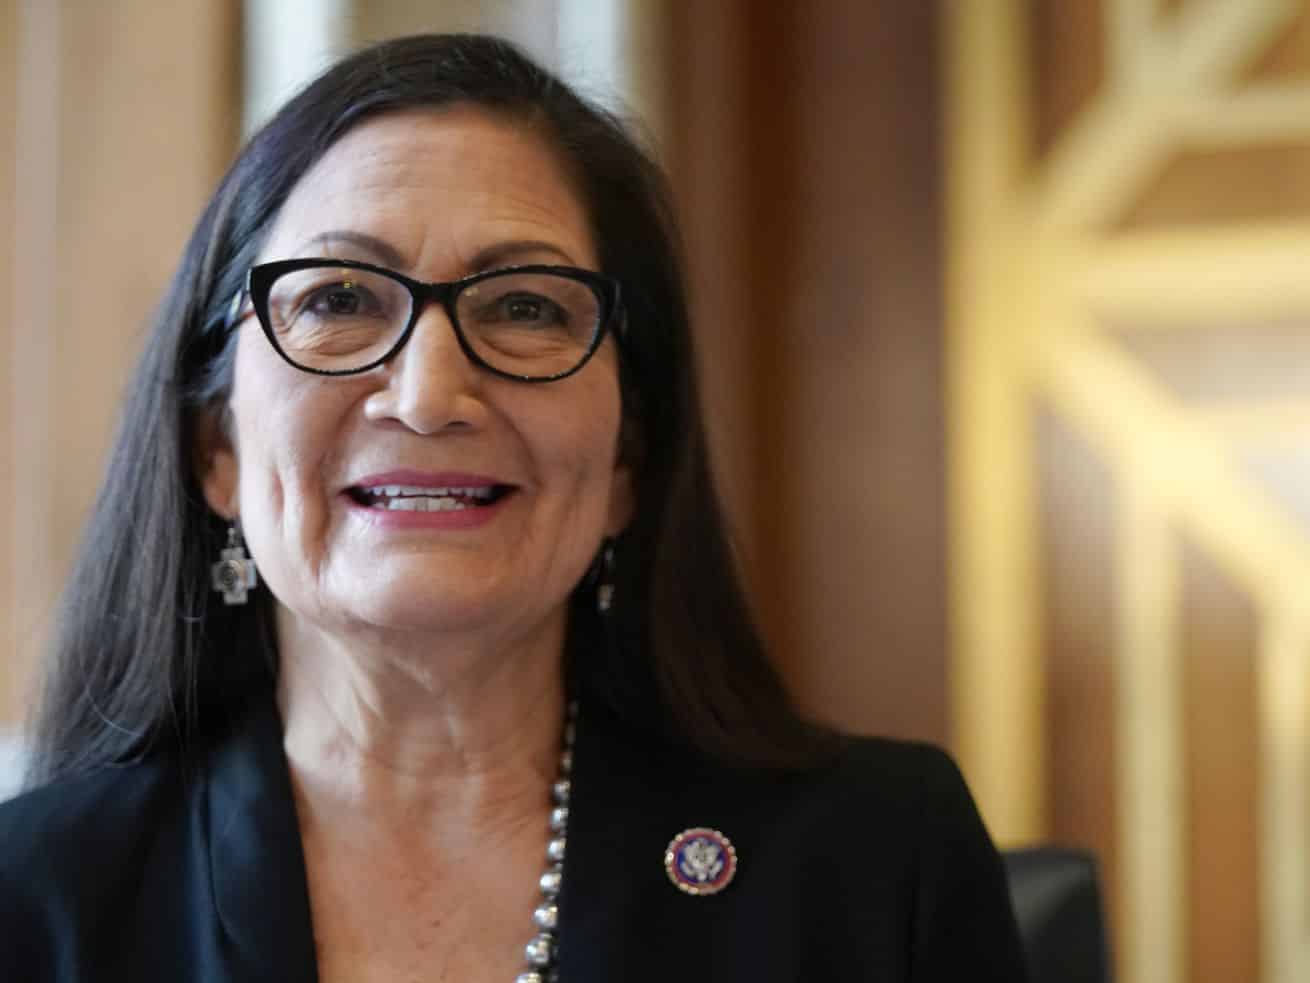 Deb Haaland confirmed as the first Native American to lead the Department of the Interior